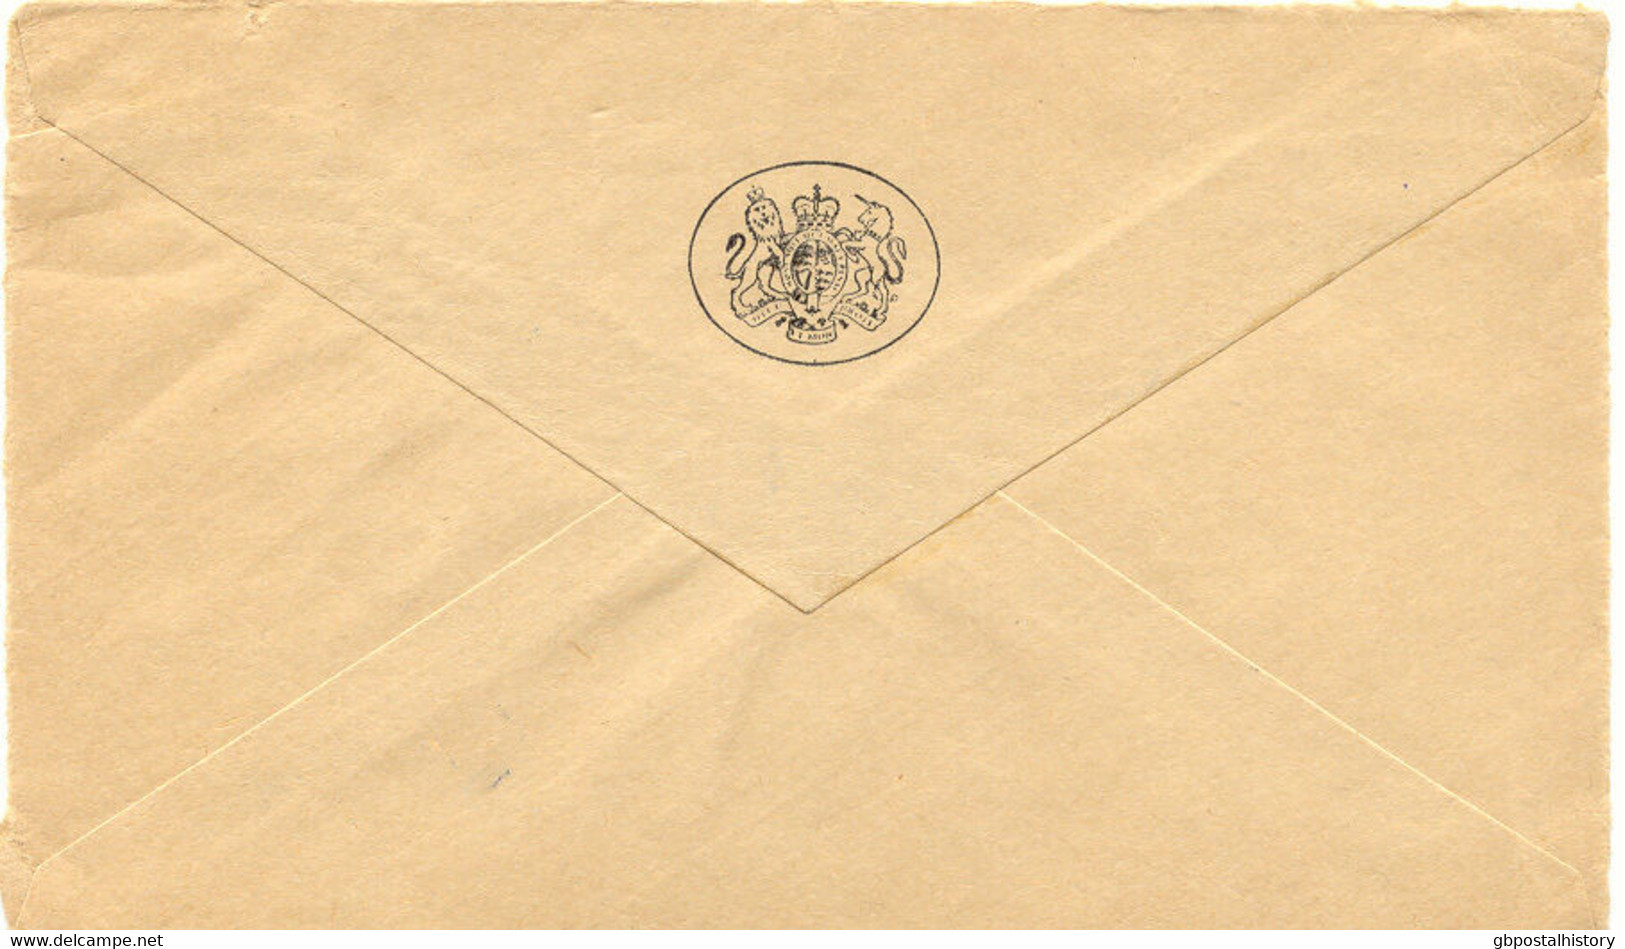 GAMBIA "OFFICIAL PAID - 4 JU 64 - BATHURST GAMBIA" Red Oval Postmark Superb OHMS - Gambia (1965-...)